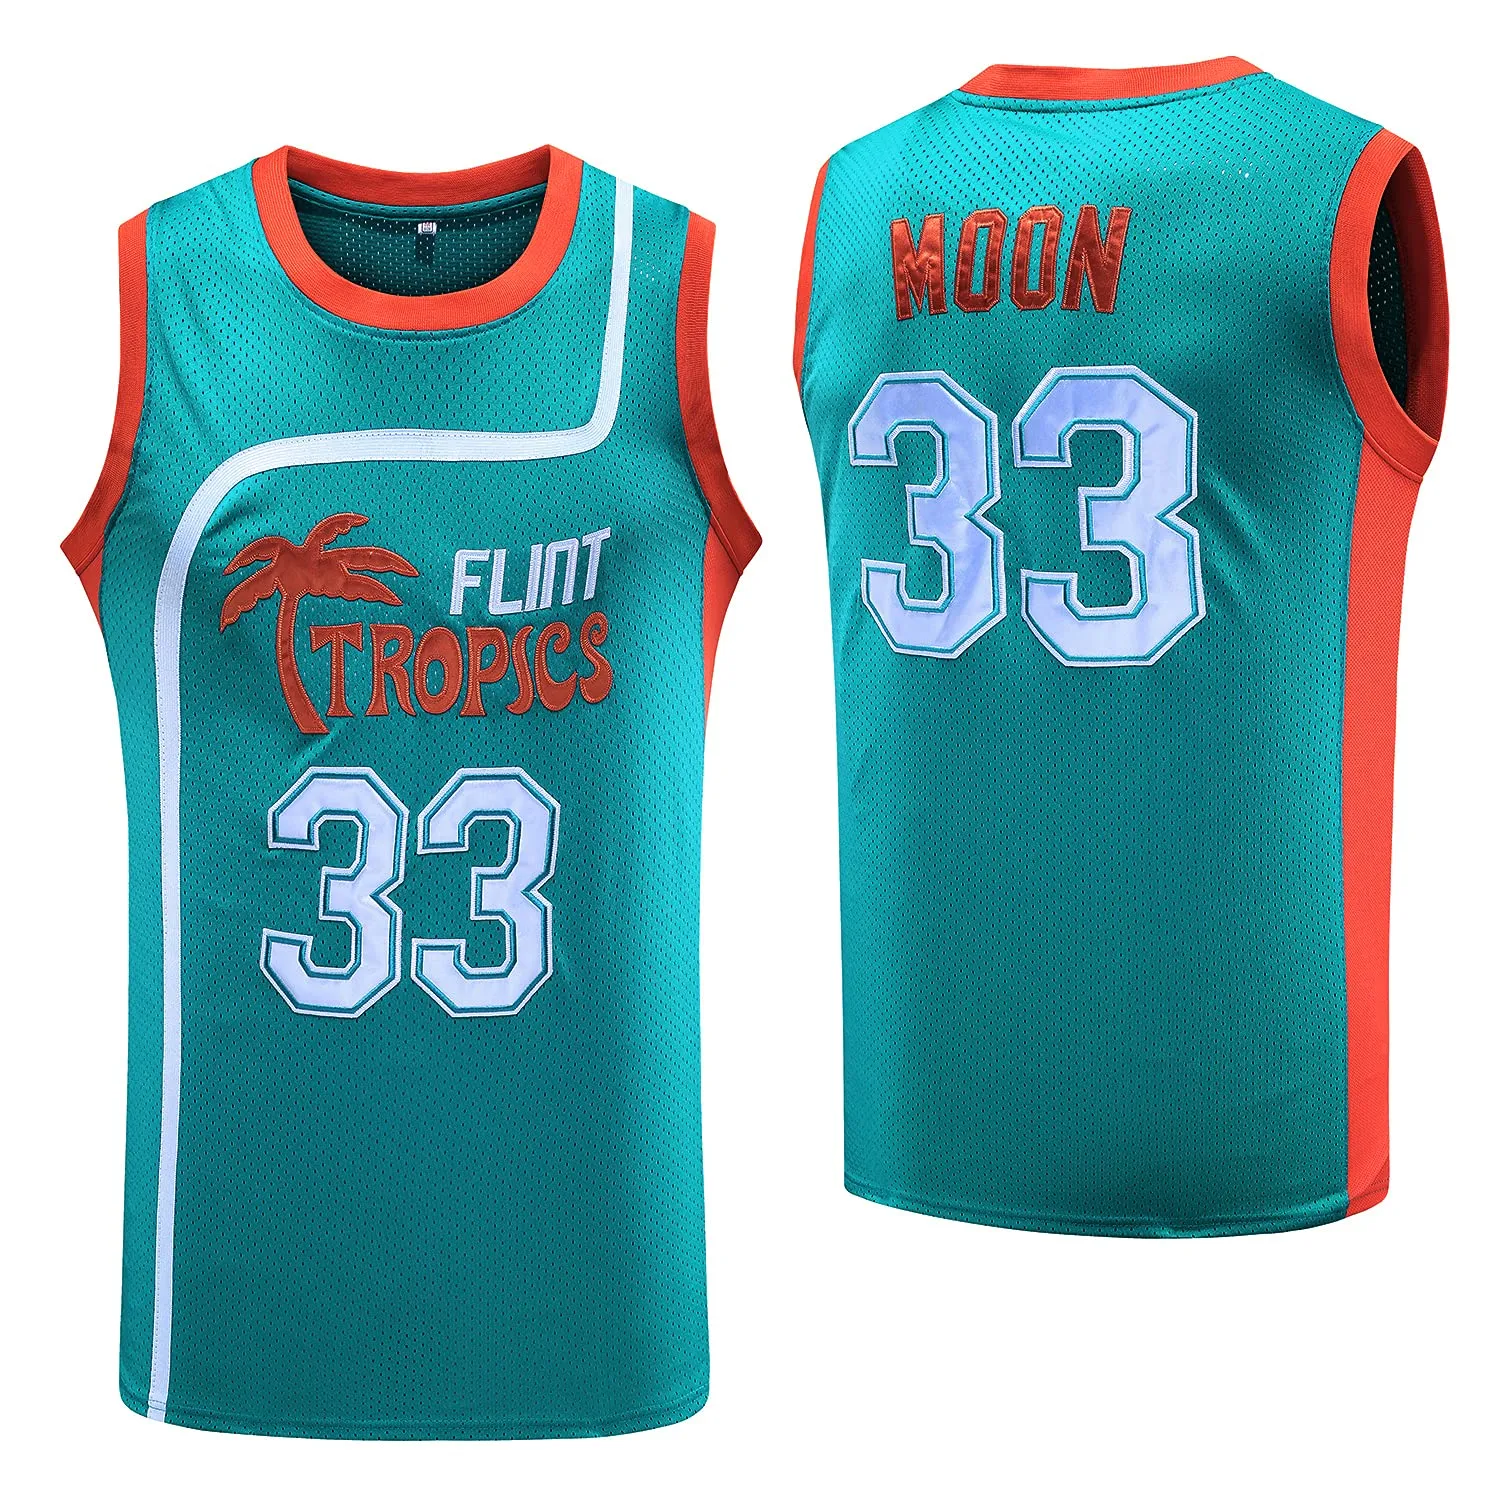 Movie Basketball Jerseys New Ship From US Jackie Moon 33 Basketball Jersey Flint Tropics Semi Pro Movie Men All Stitched S-3XL High Quality